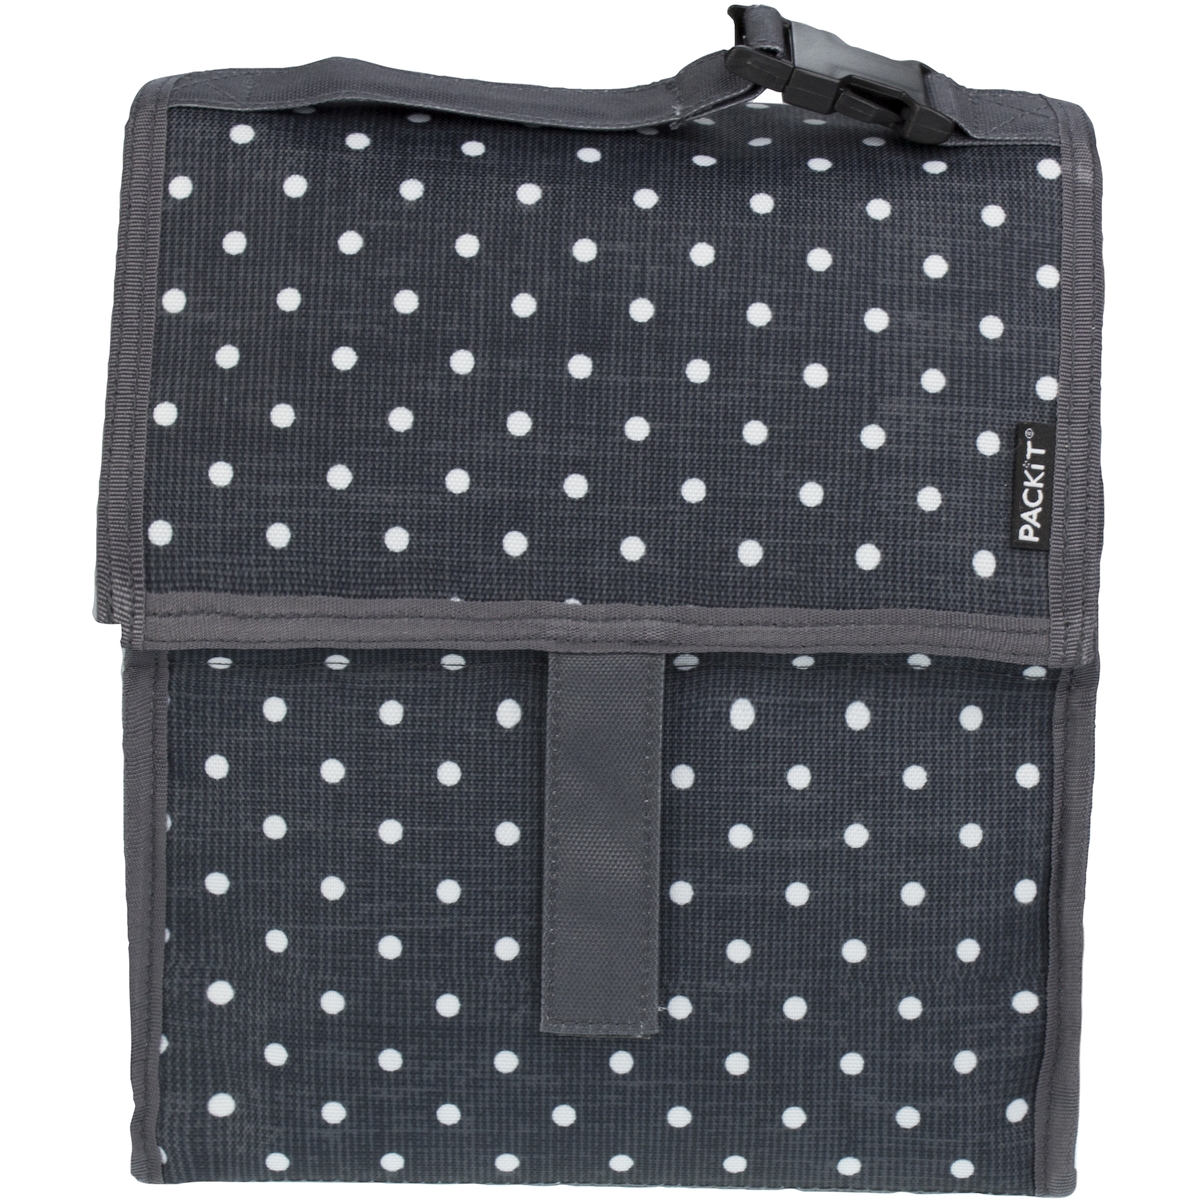     Lunch bag Polka Dots (PACKiT PACKIT0028)